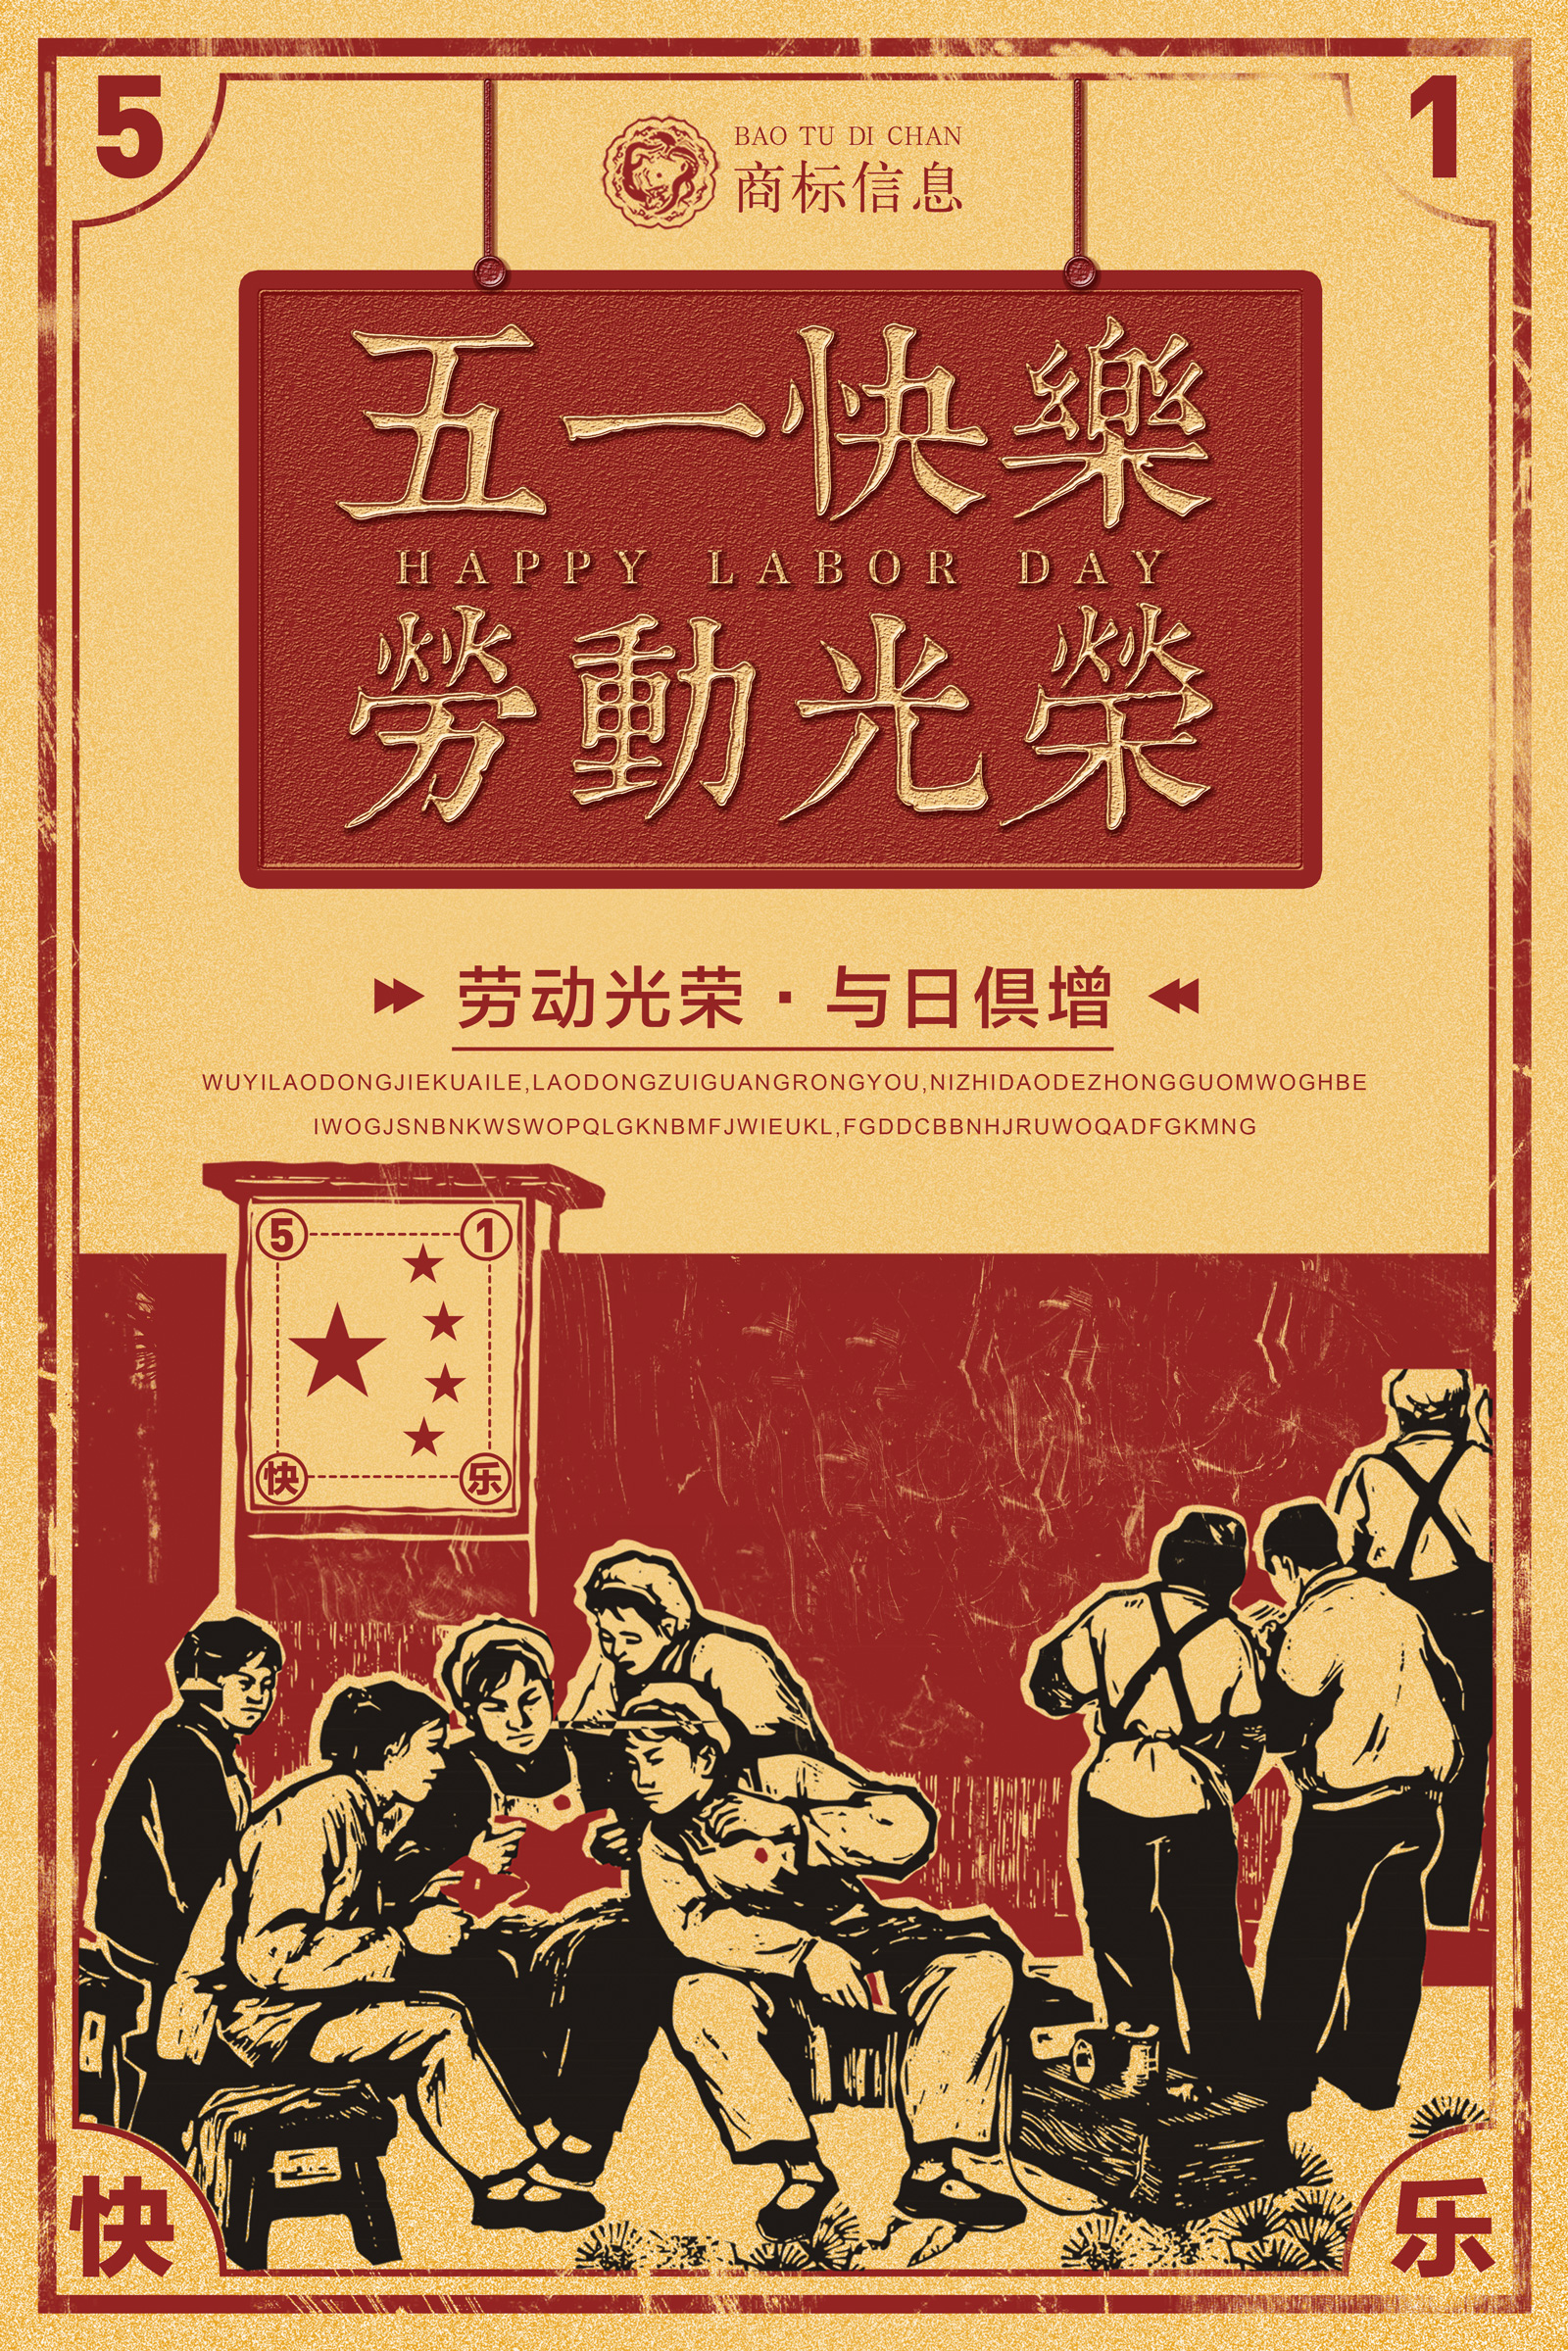 Retro style May Day Labor Day posters China PSD File Free Download